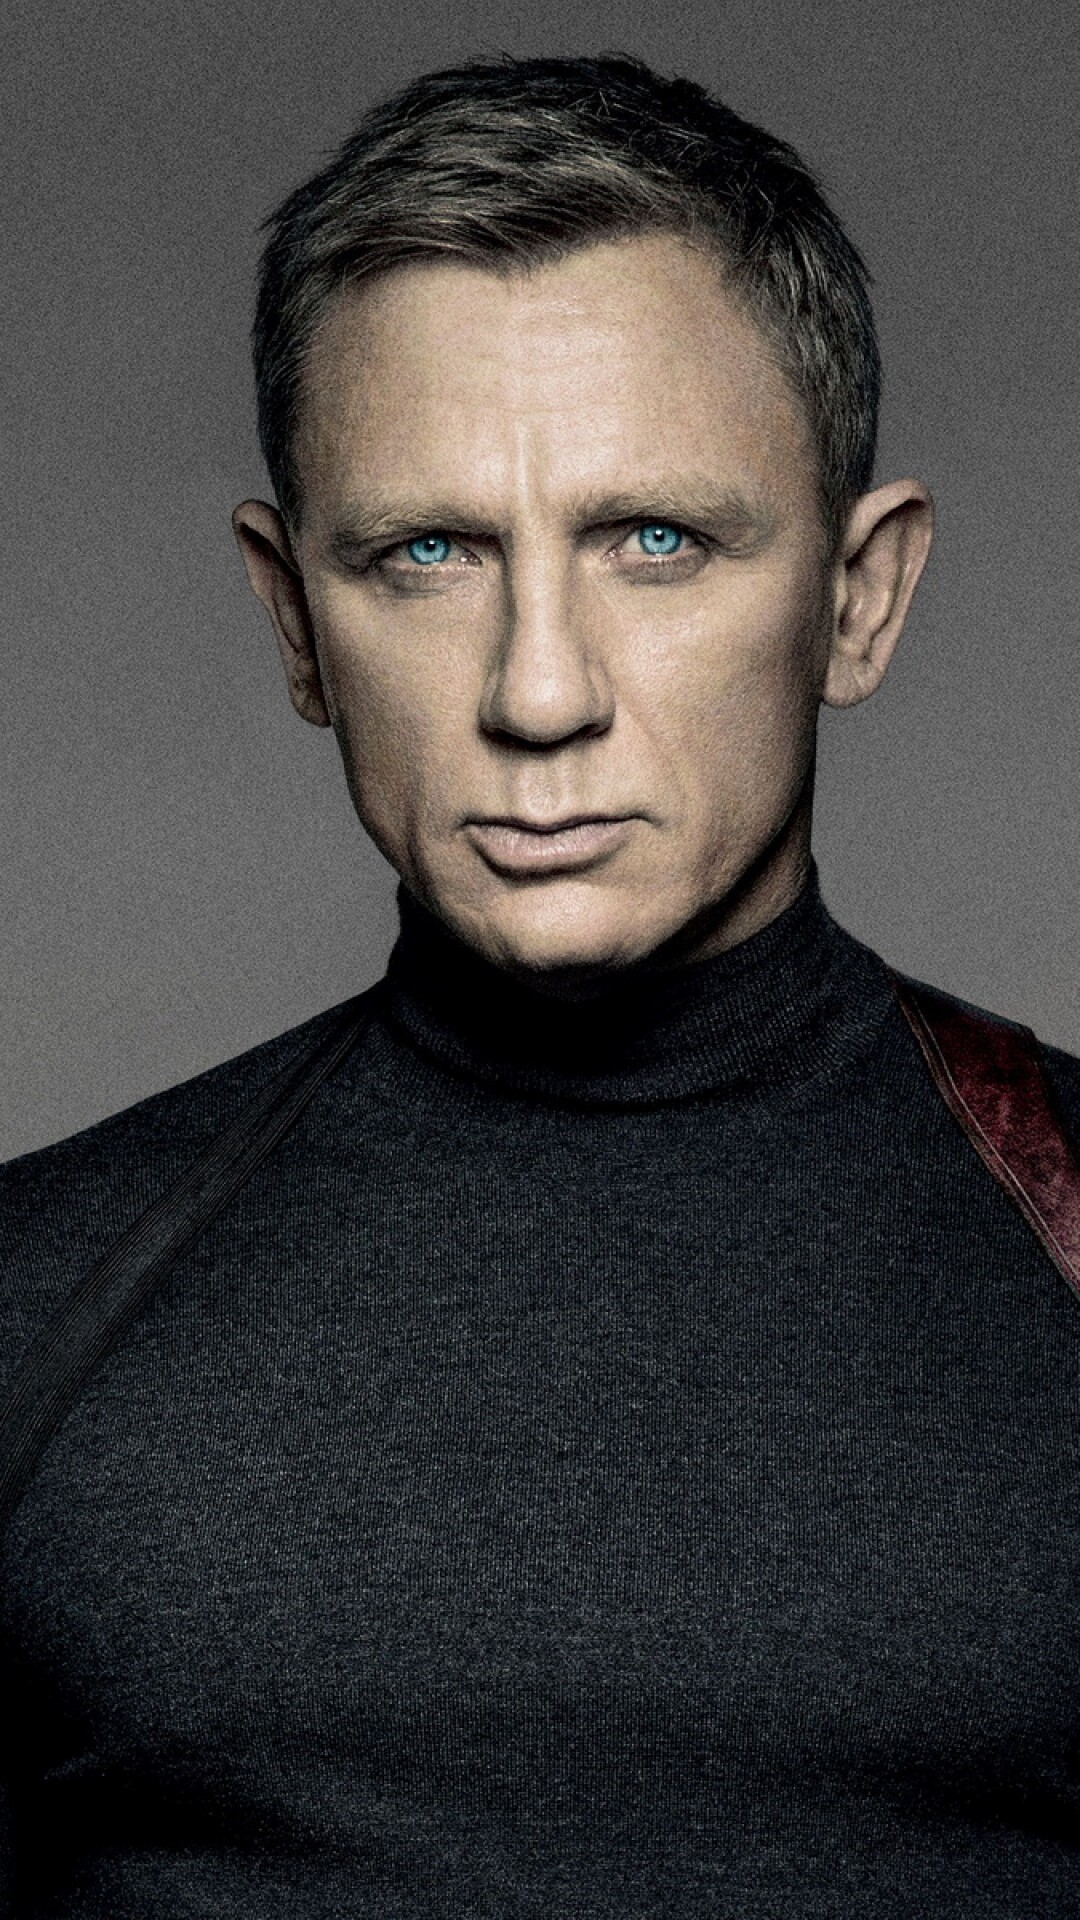 James Bond: Spectre, 007, Daniel Craig, Produced by EON Productions. 1080x1920 Full HD Background.